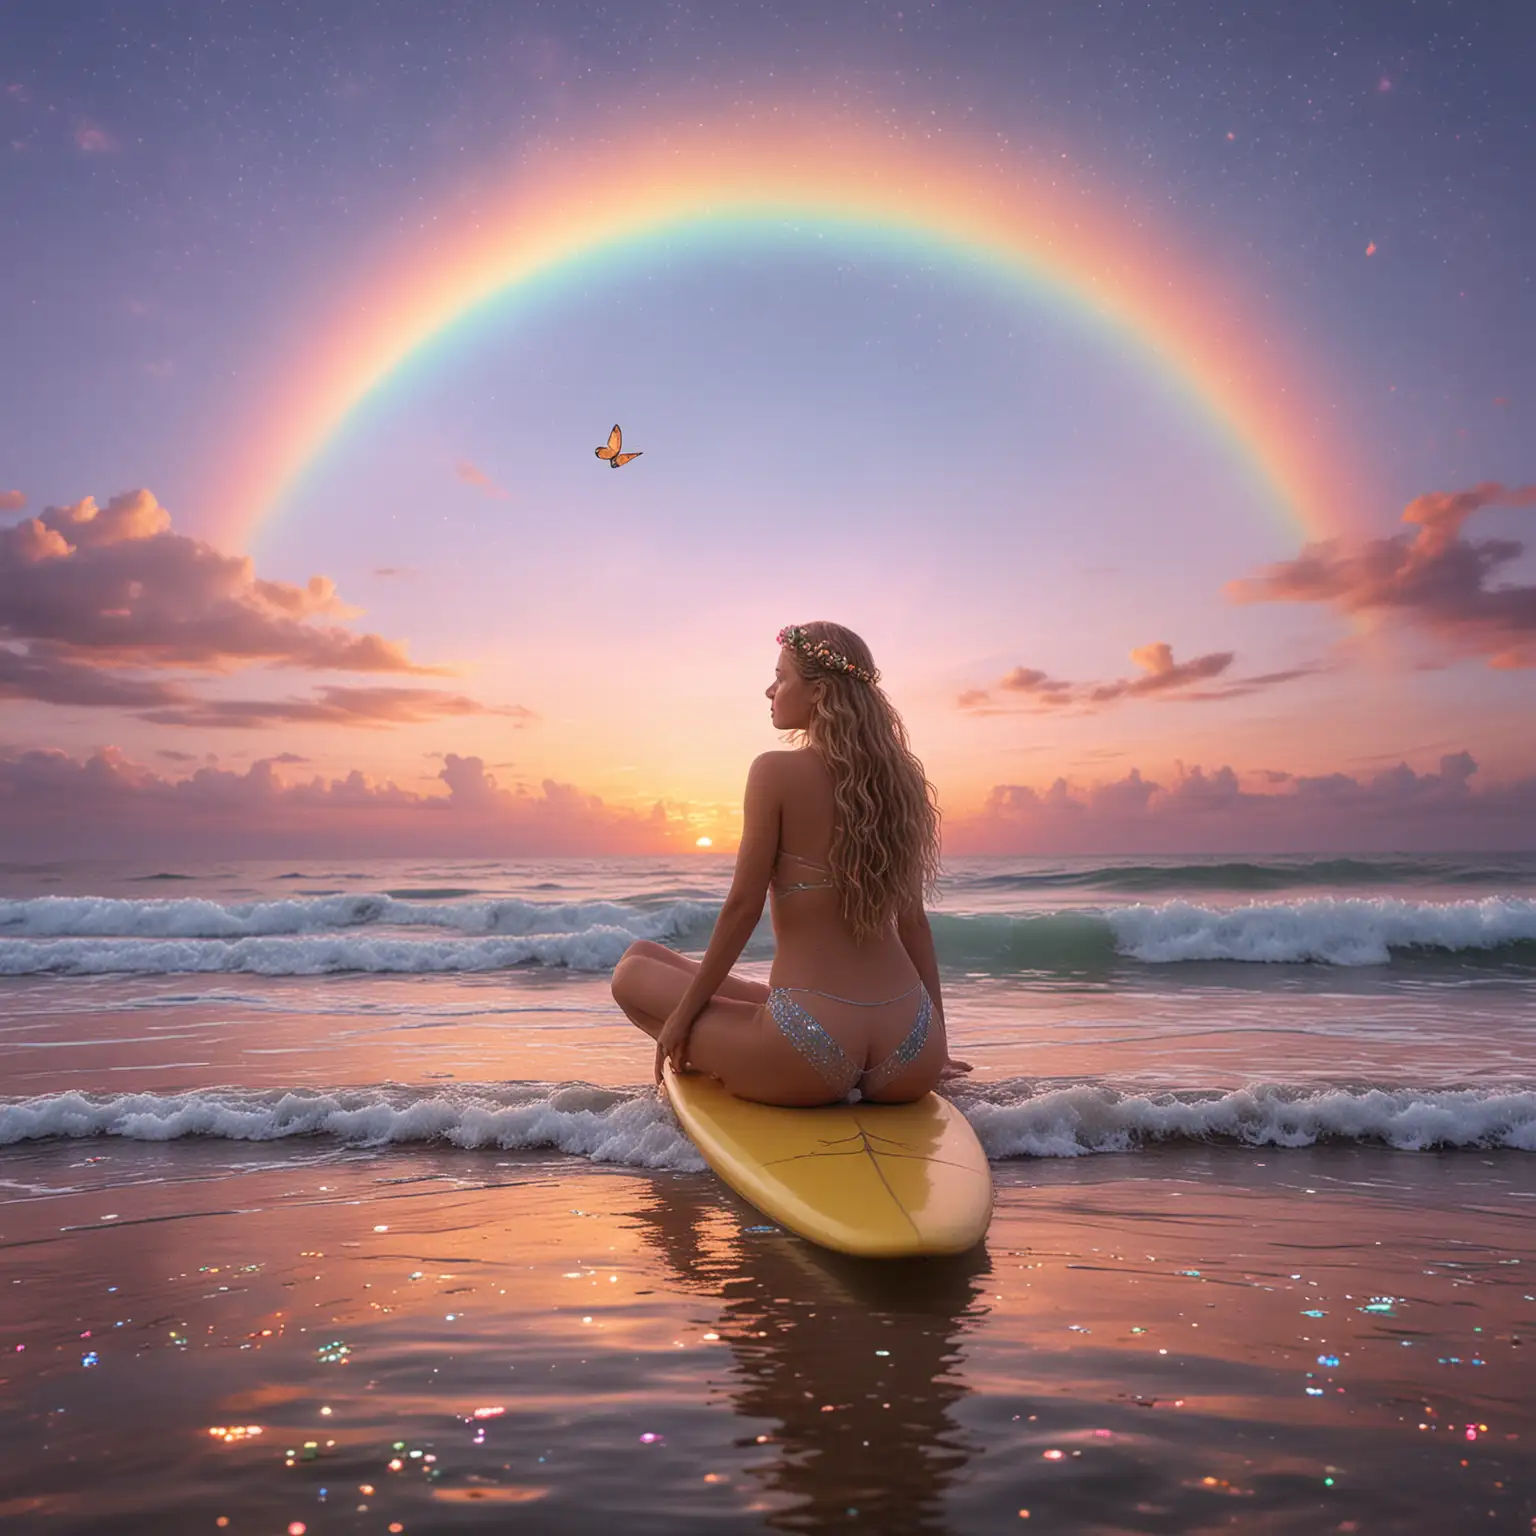 Transcendent Goddess Surfing at Sunset with Rainbow Sky